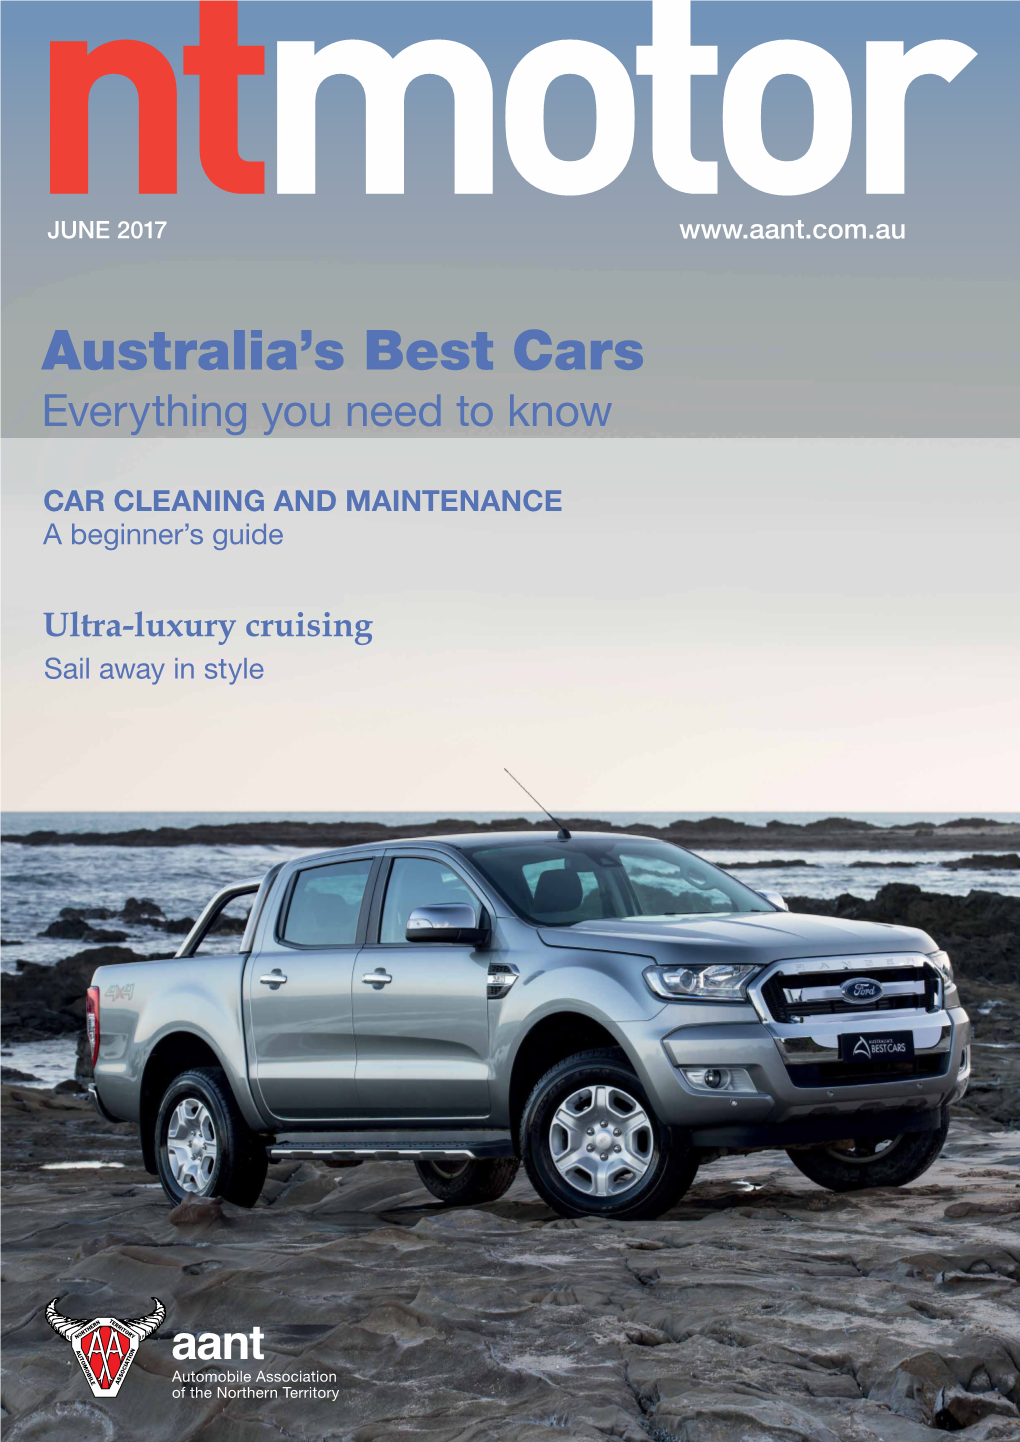 Australia's Best Cars Magazine Available for Sale In-Store